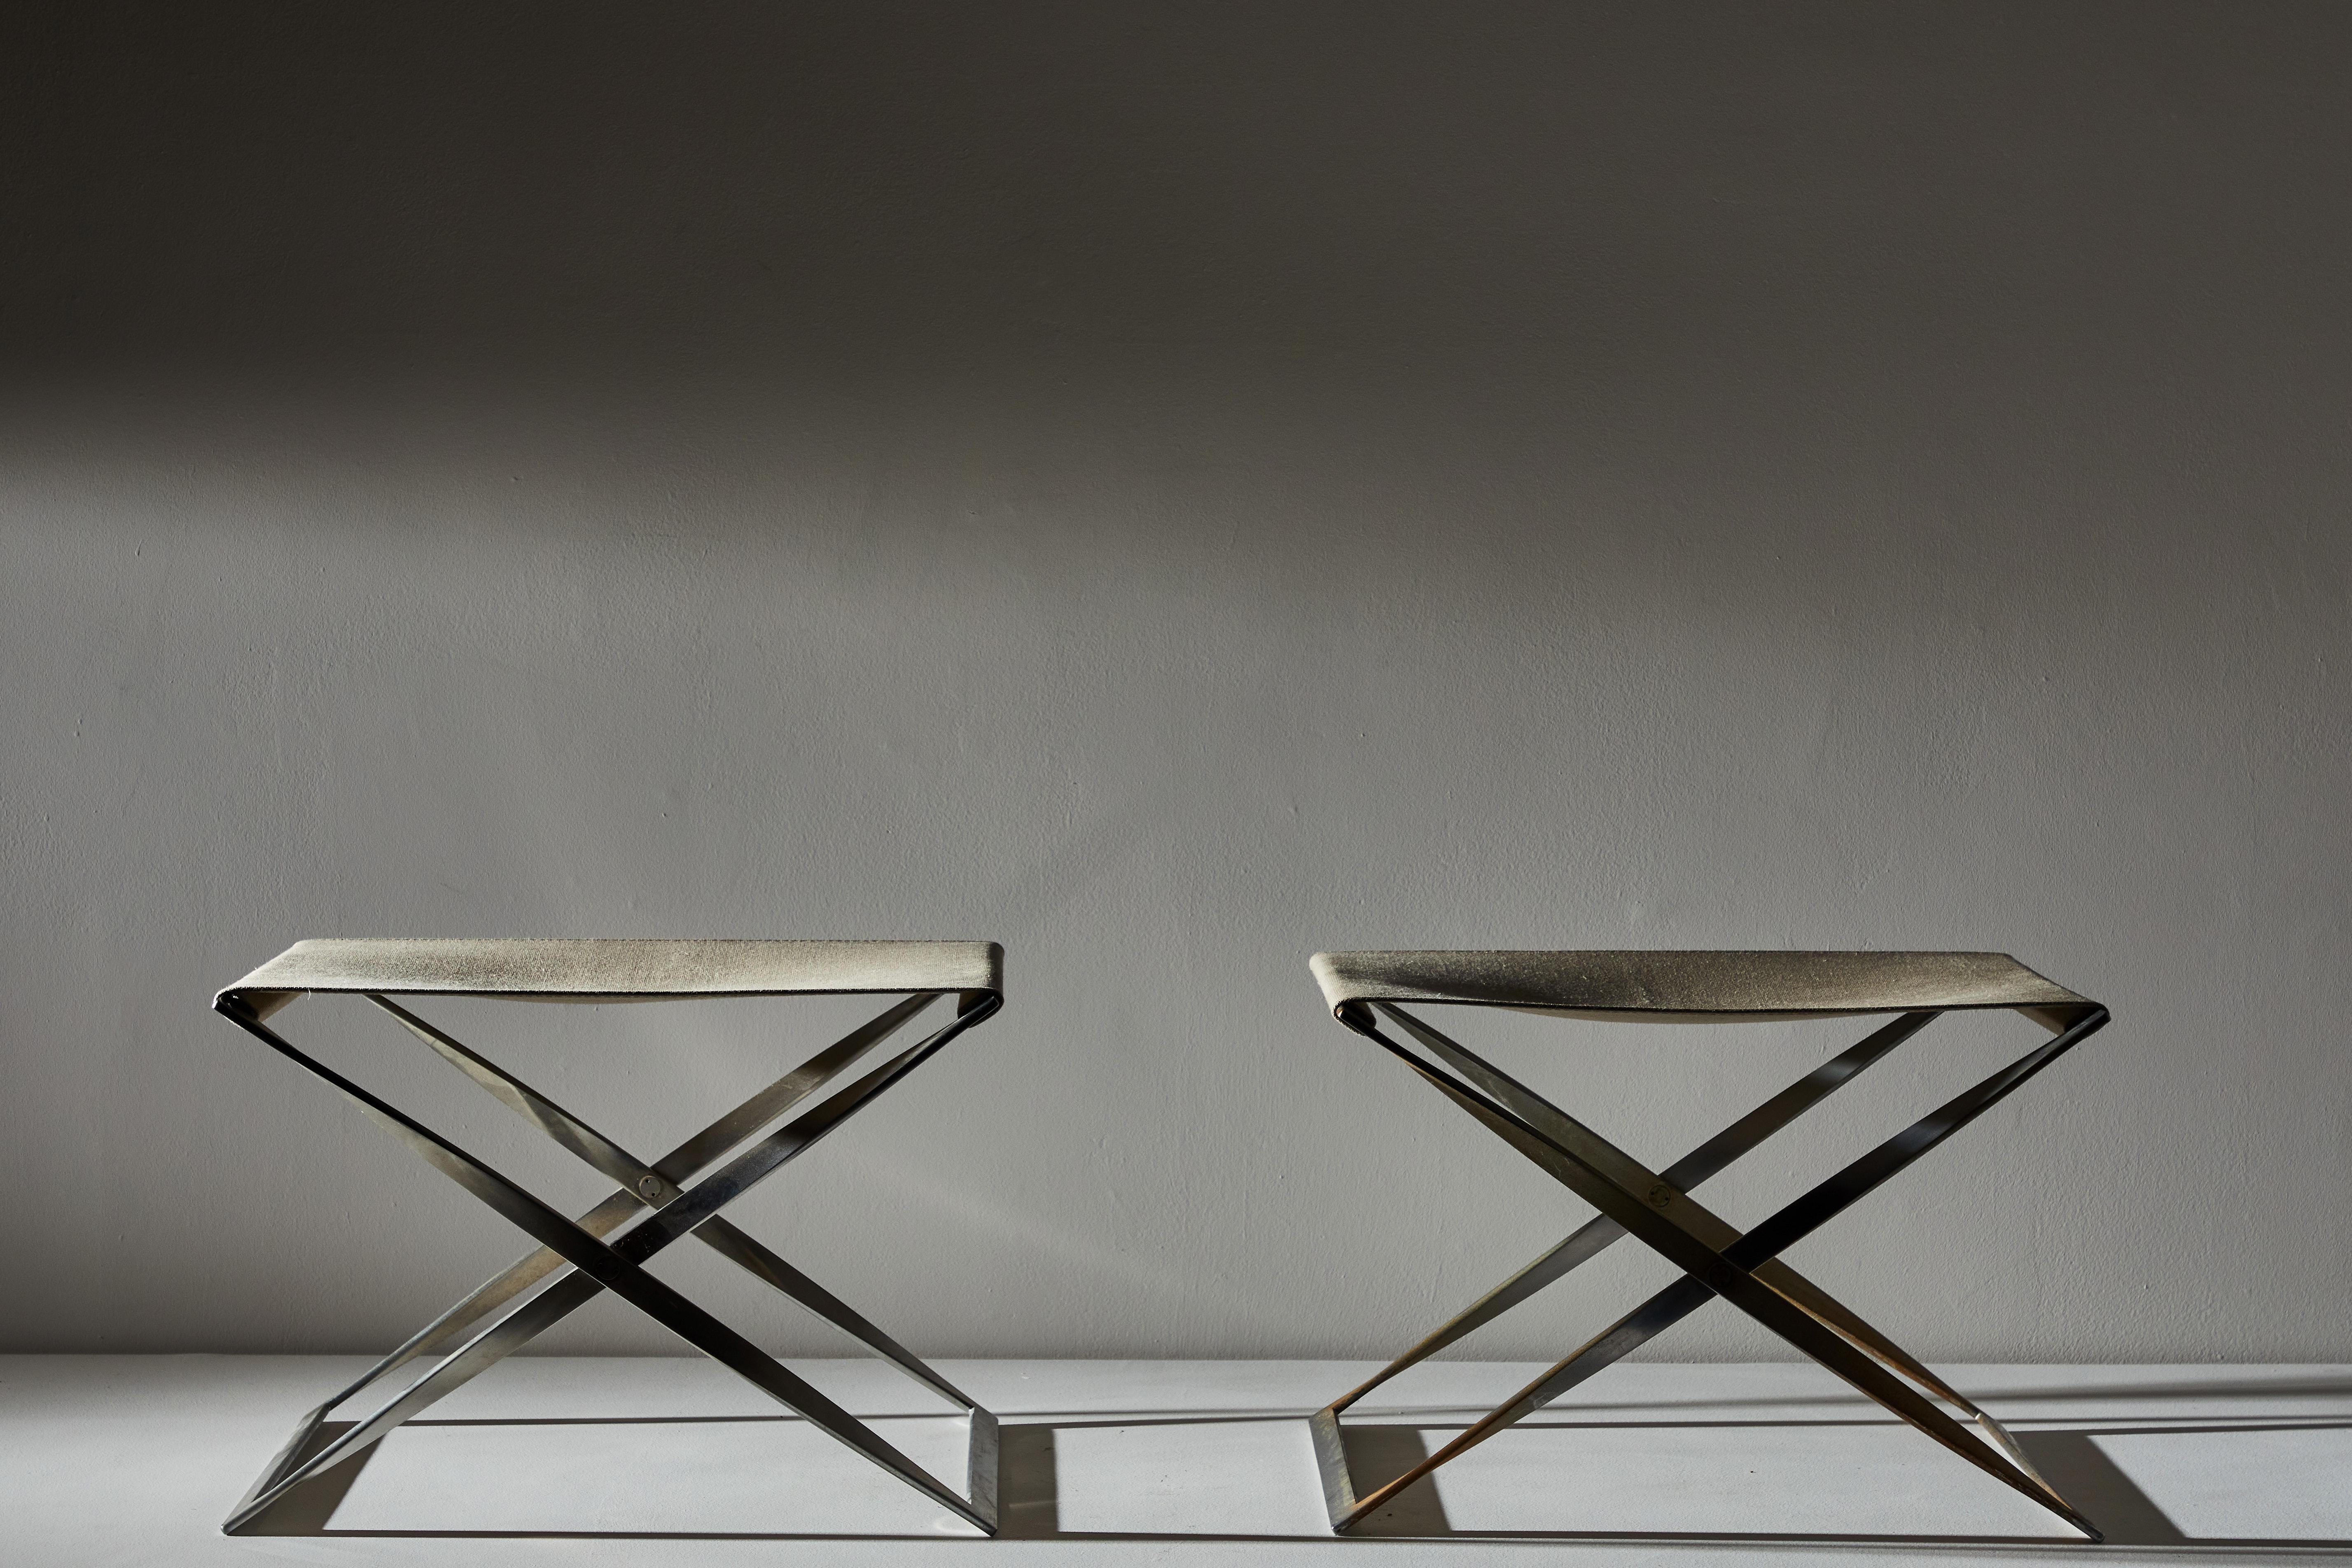 Pair of PK91 folding stools by Poul Kjærholm for E. Kold Christensen. Made in Denmark, circa 1961. 

Materials: canvas, matte chromed-plated steel frame. Canvas replacement slings by Fritz Hansen.

Literature: The Furniture of Poul Kjaerholm: